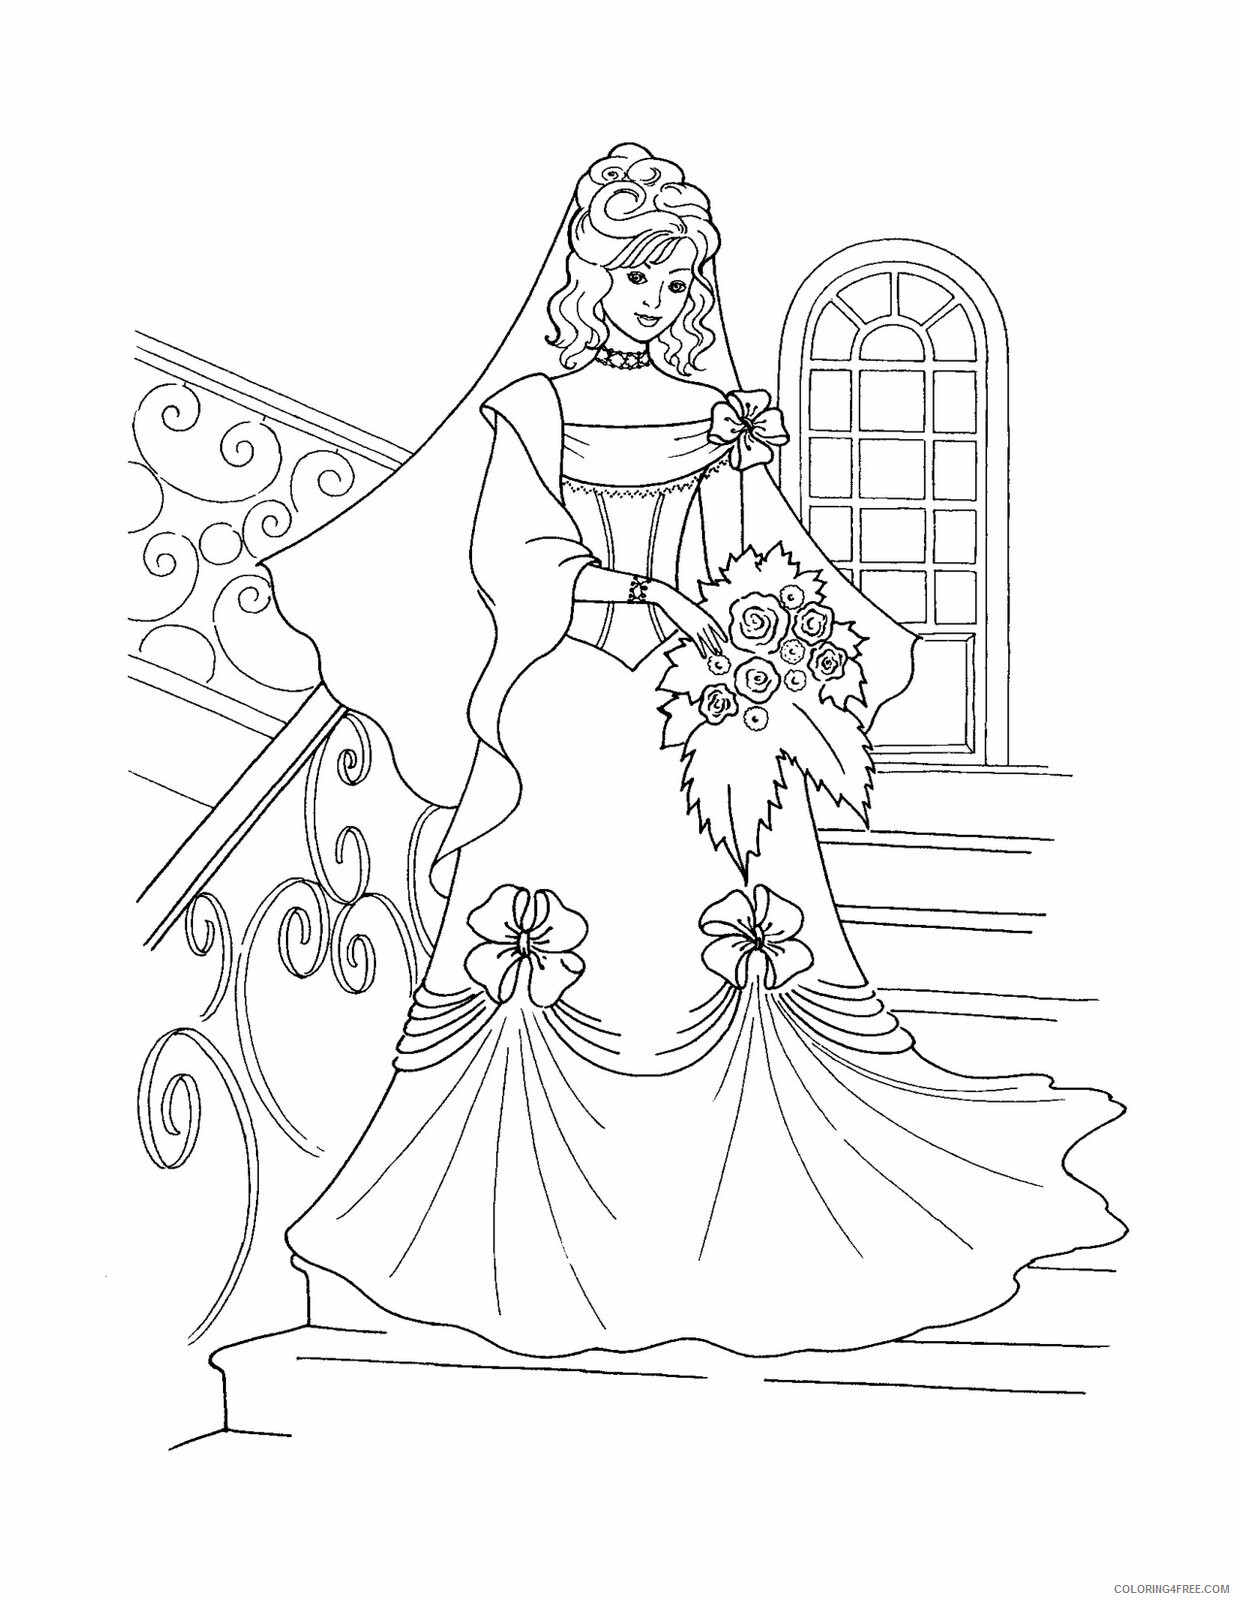 Princess Coloring Pages for Girls Free to Princess Printable 2021 1095 Coloring4free